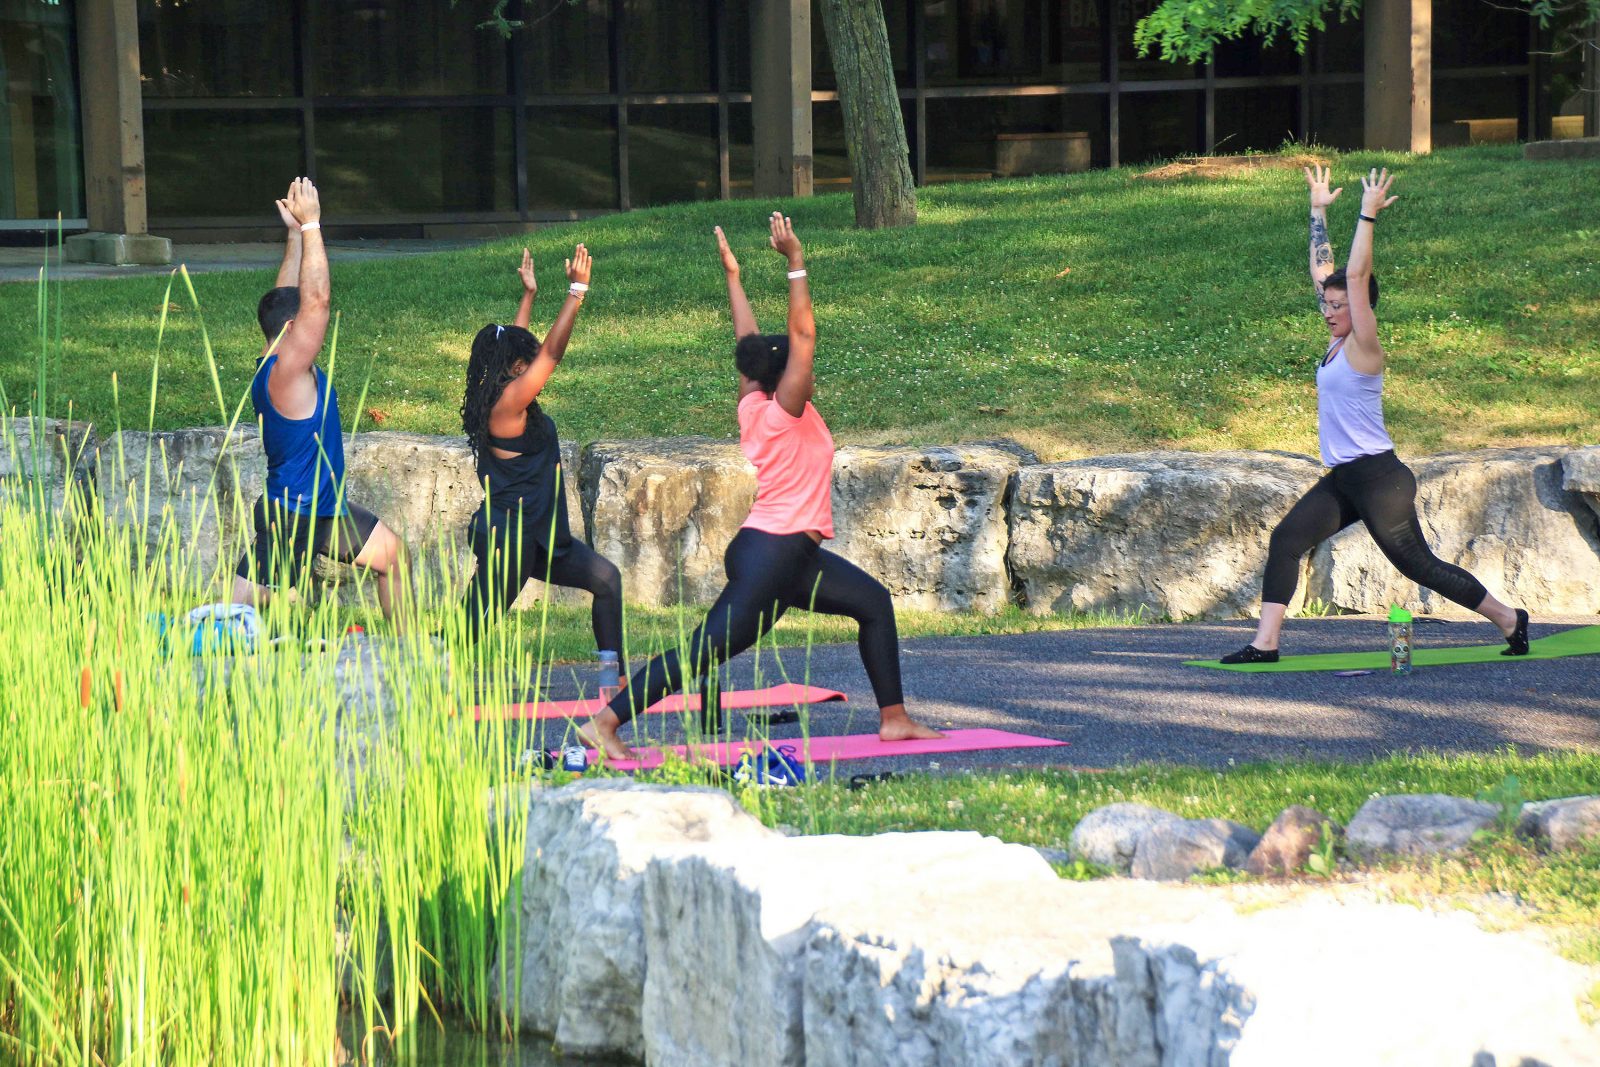 Free yoga offered on campus Wednesday mornings – The Brock News